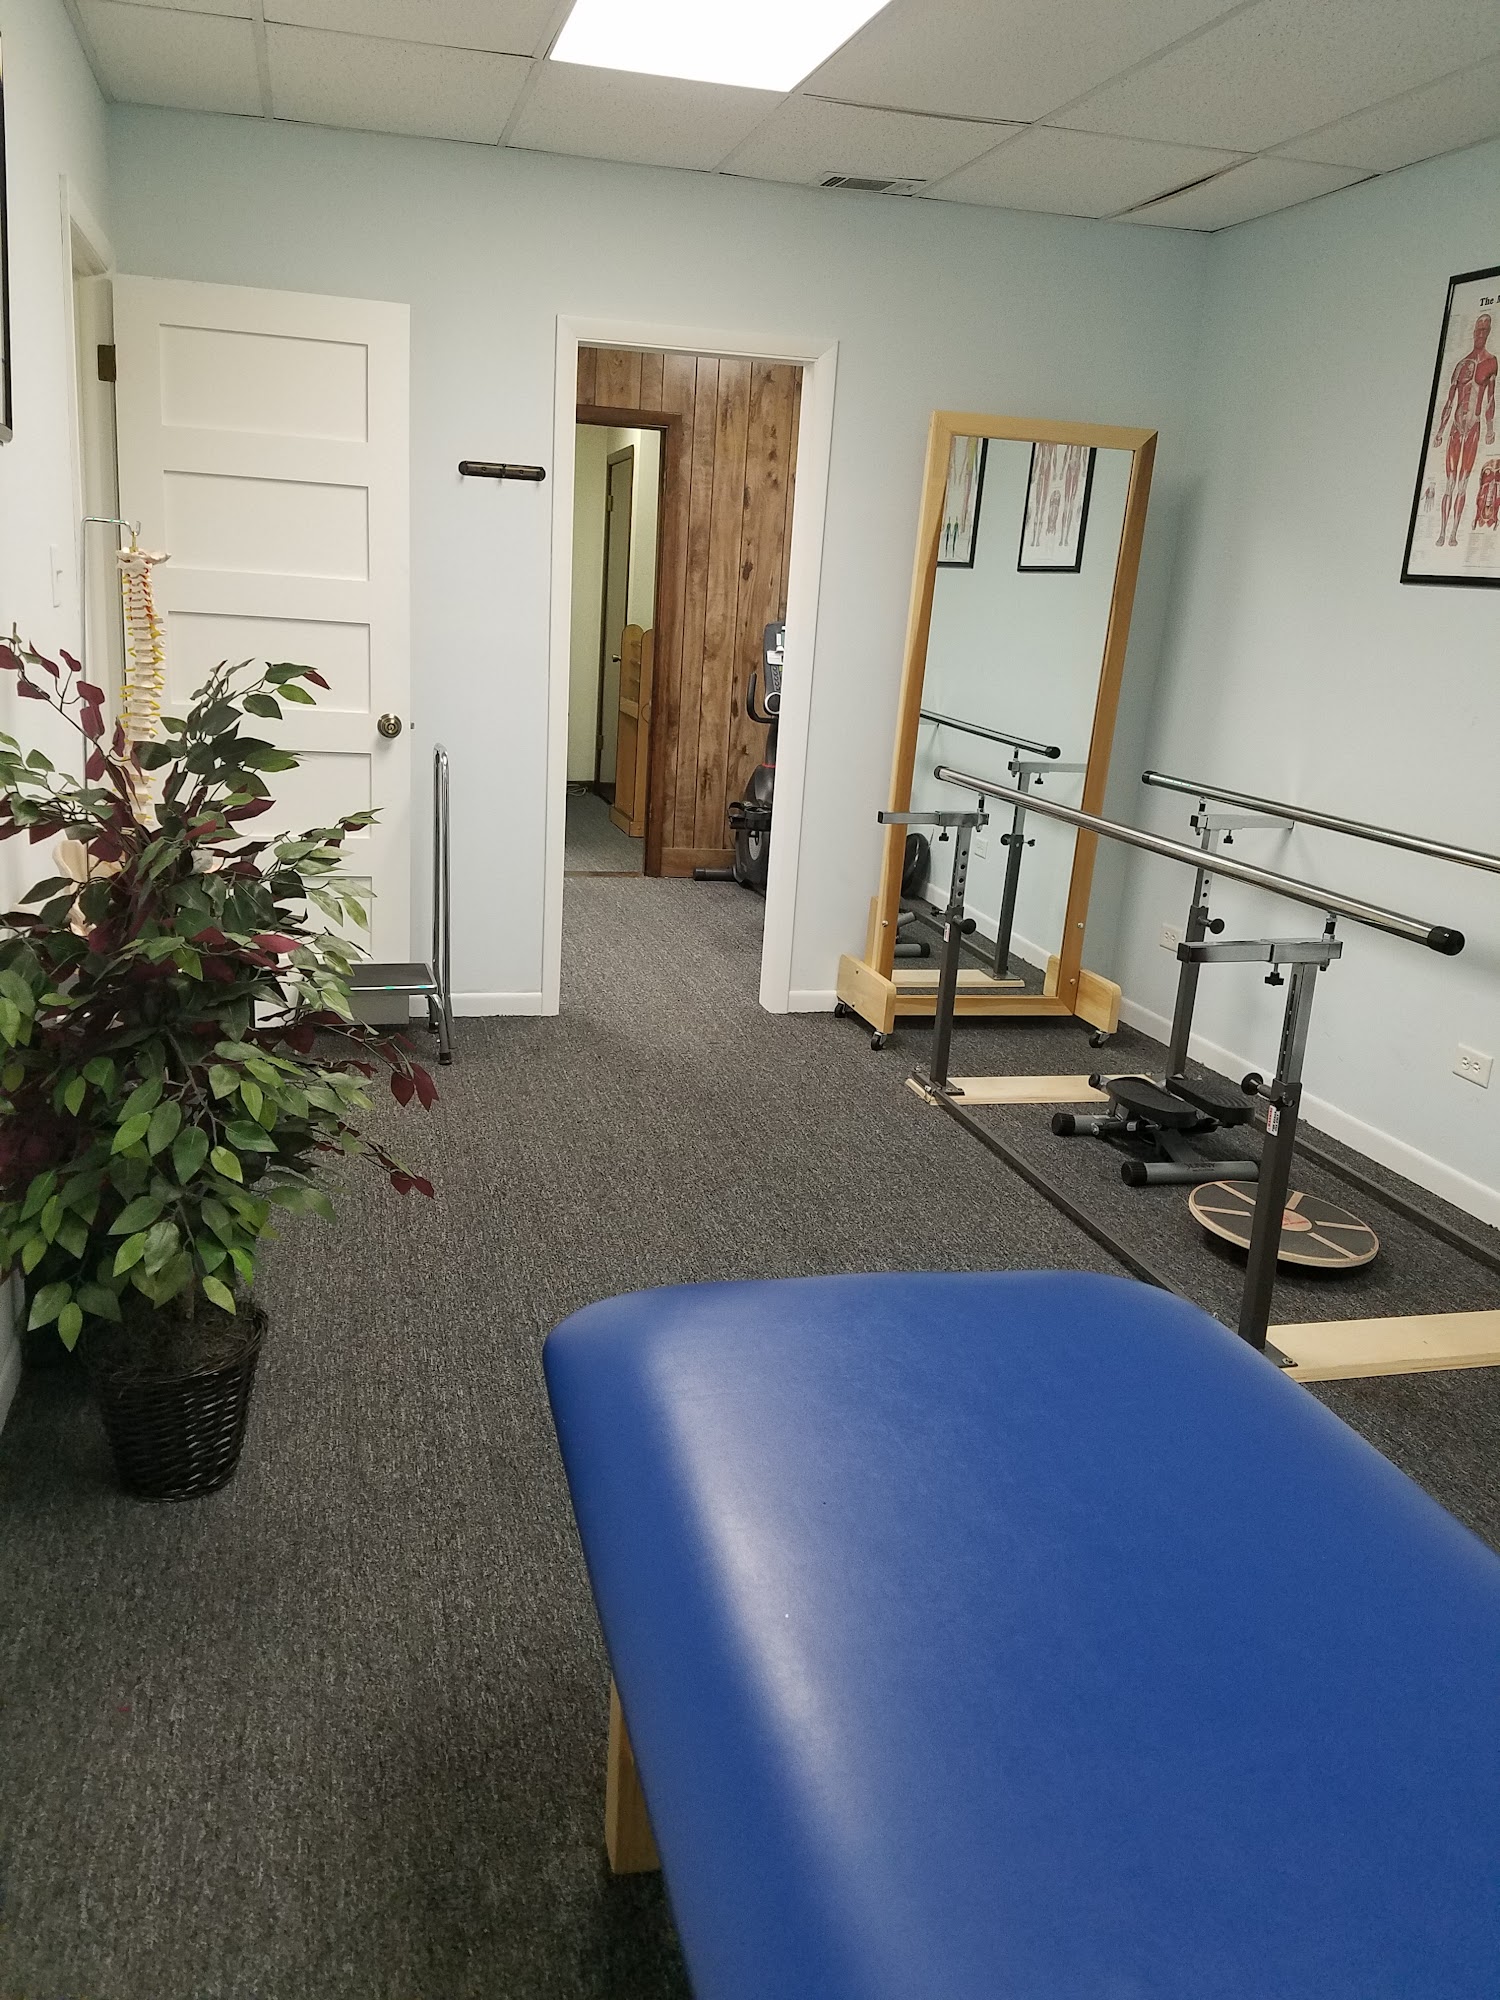 Physical Therapy Consultants 6006 W 159th St Bldg A Unit 1B, Oak Forest Illinois 60452